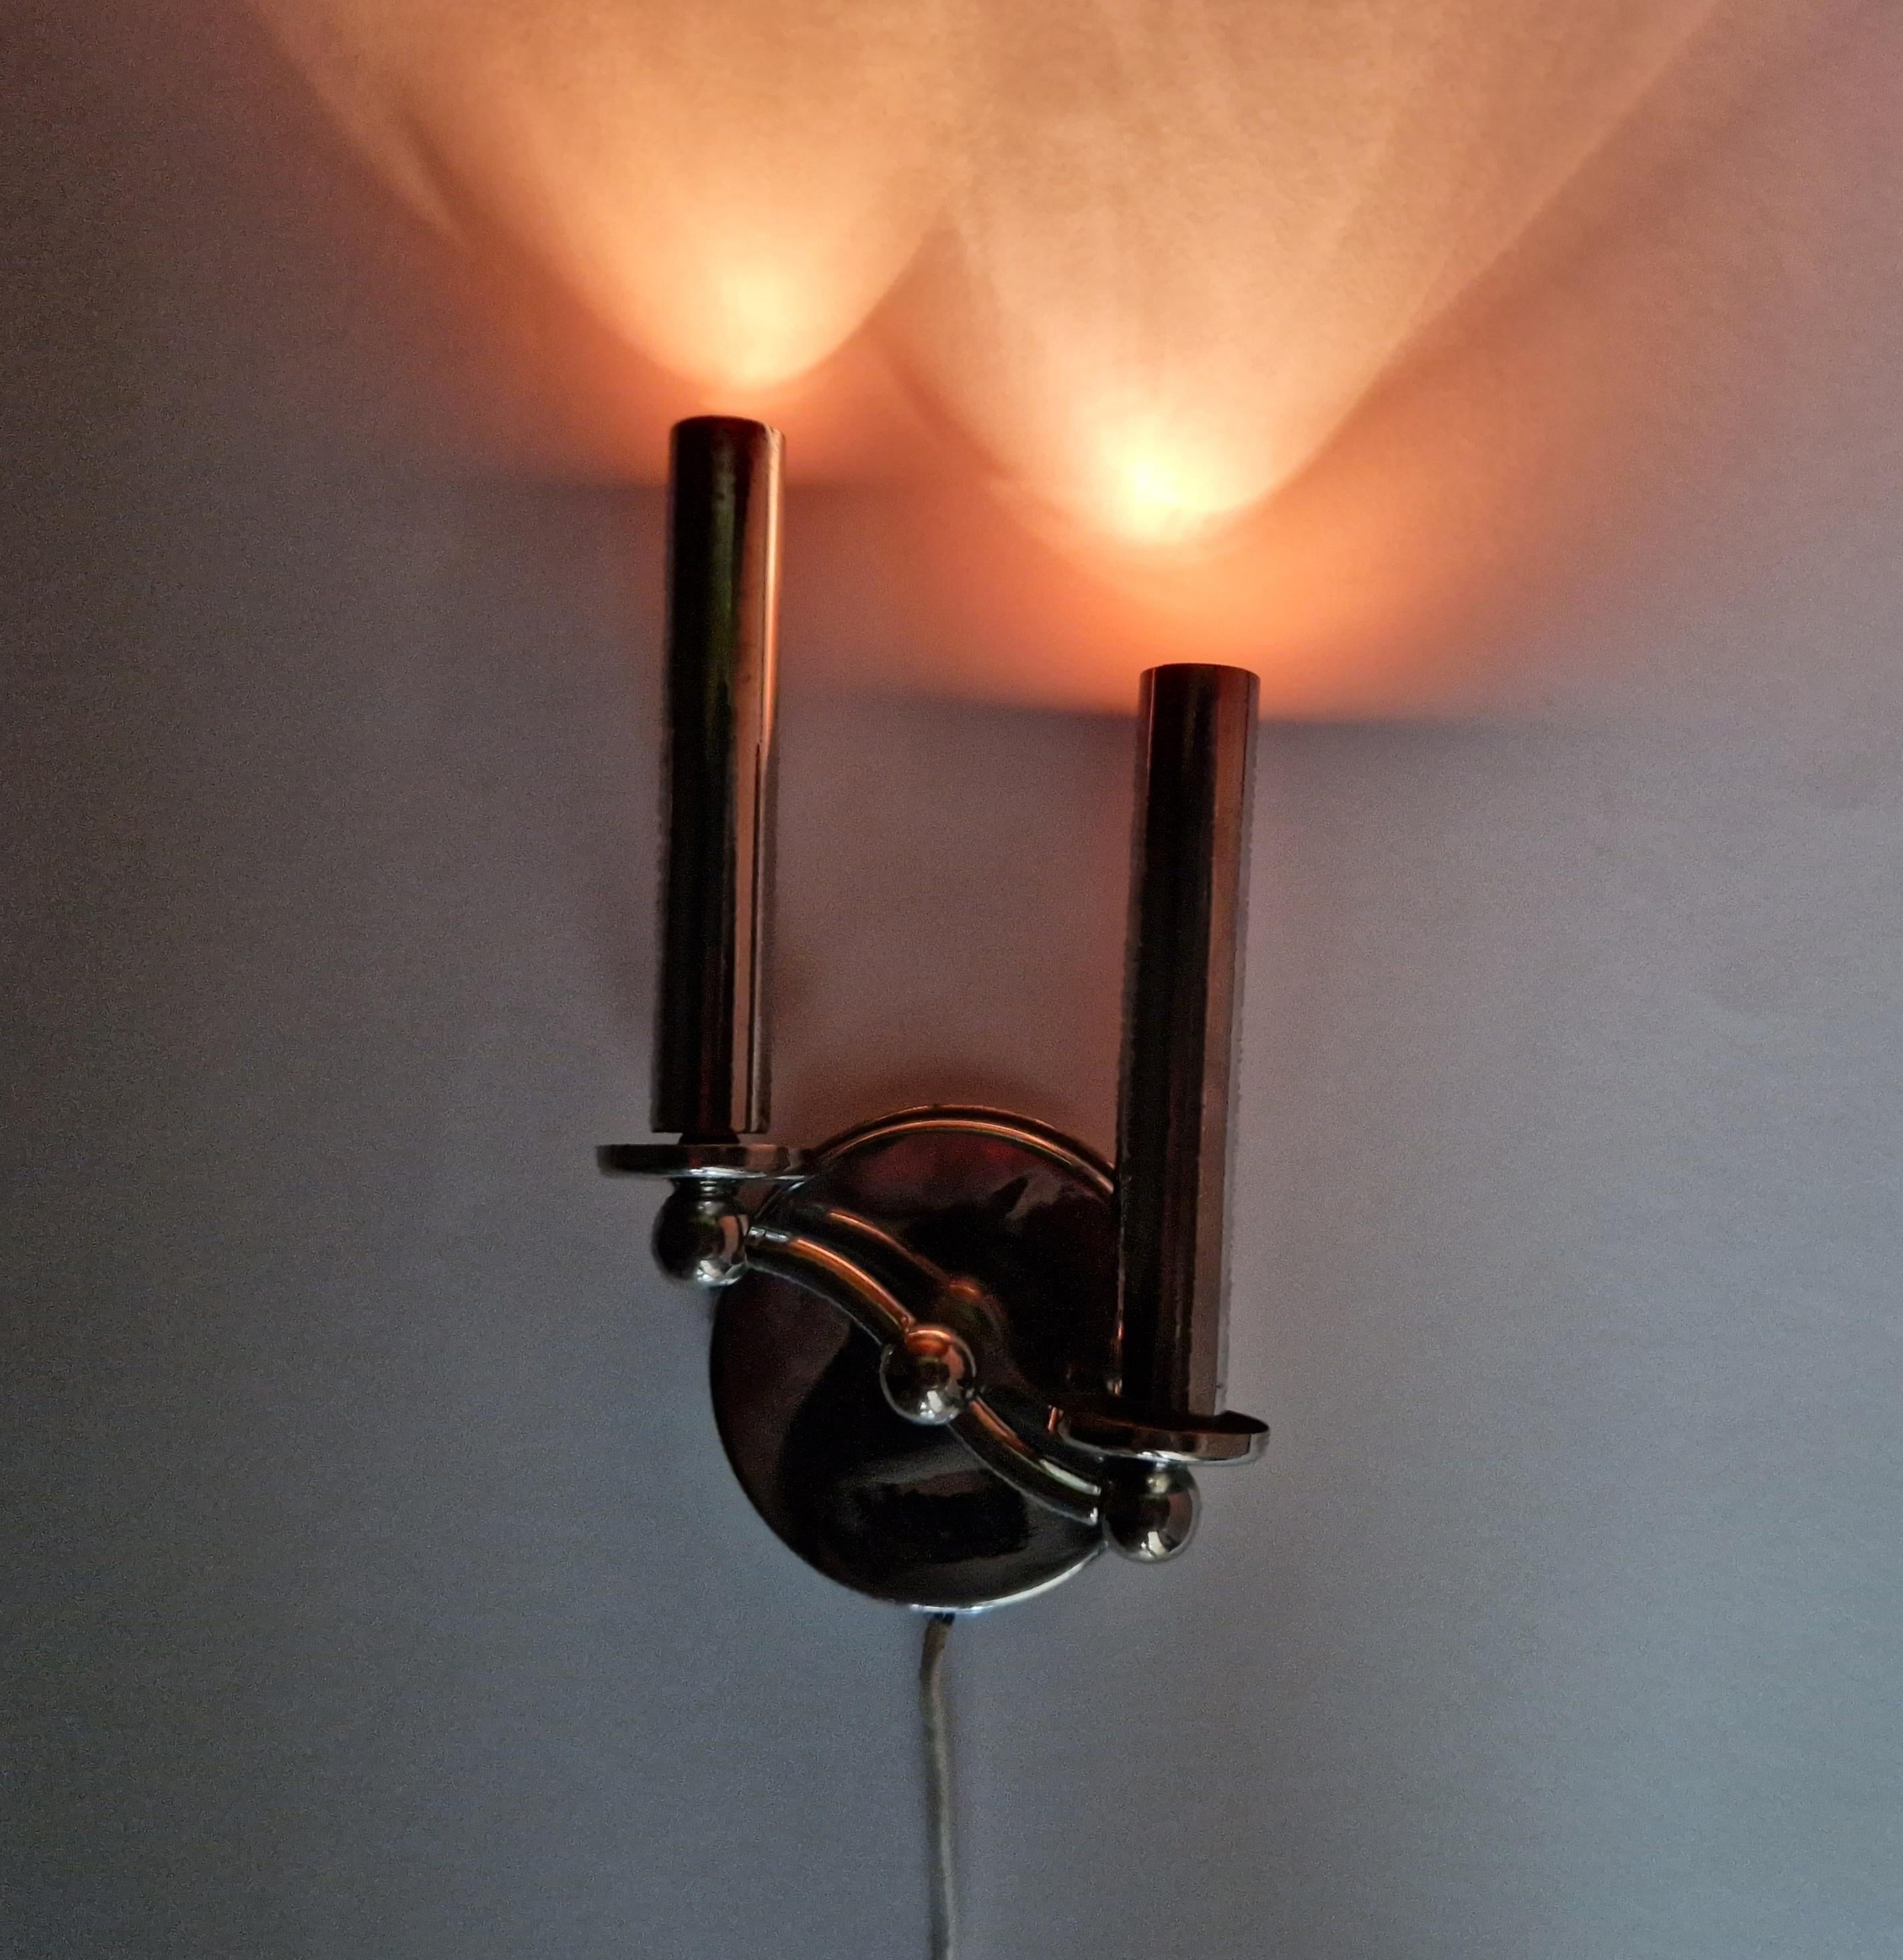 Pair of Rare Chrome Art Deco / Functionalism Wall Lamps, 1930s For Sale 7